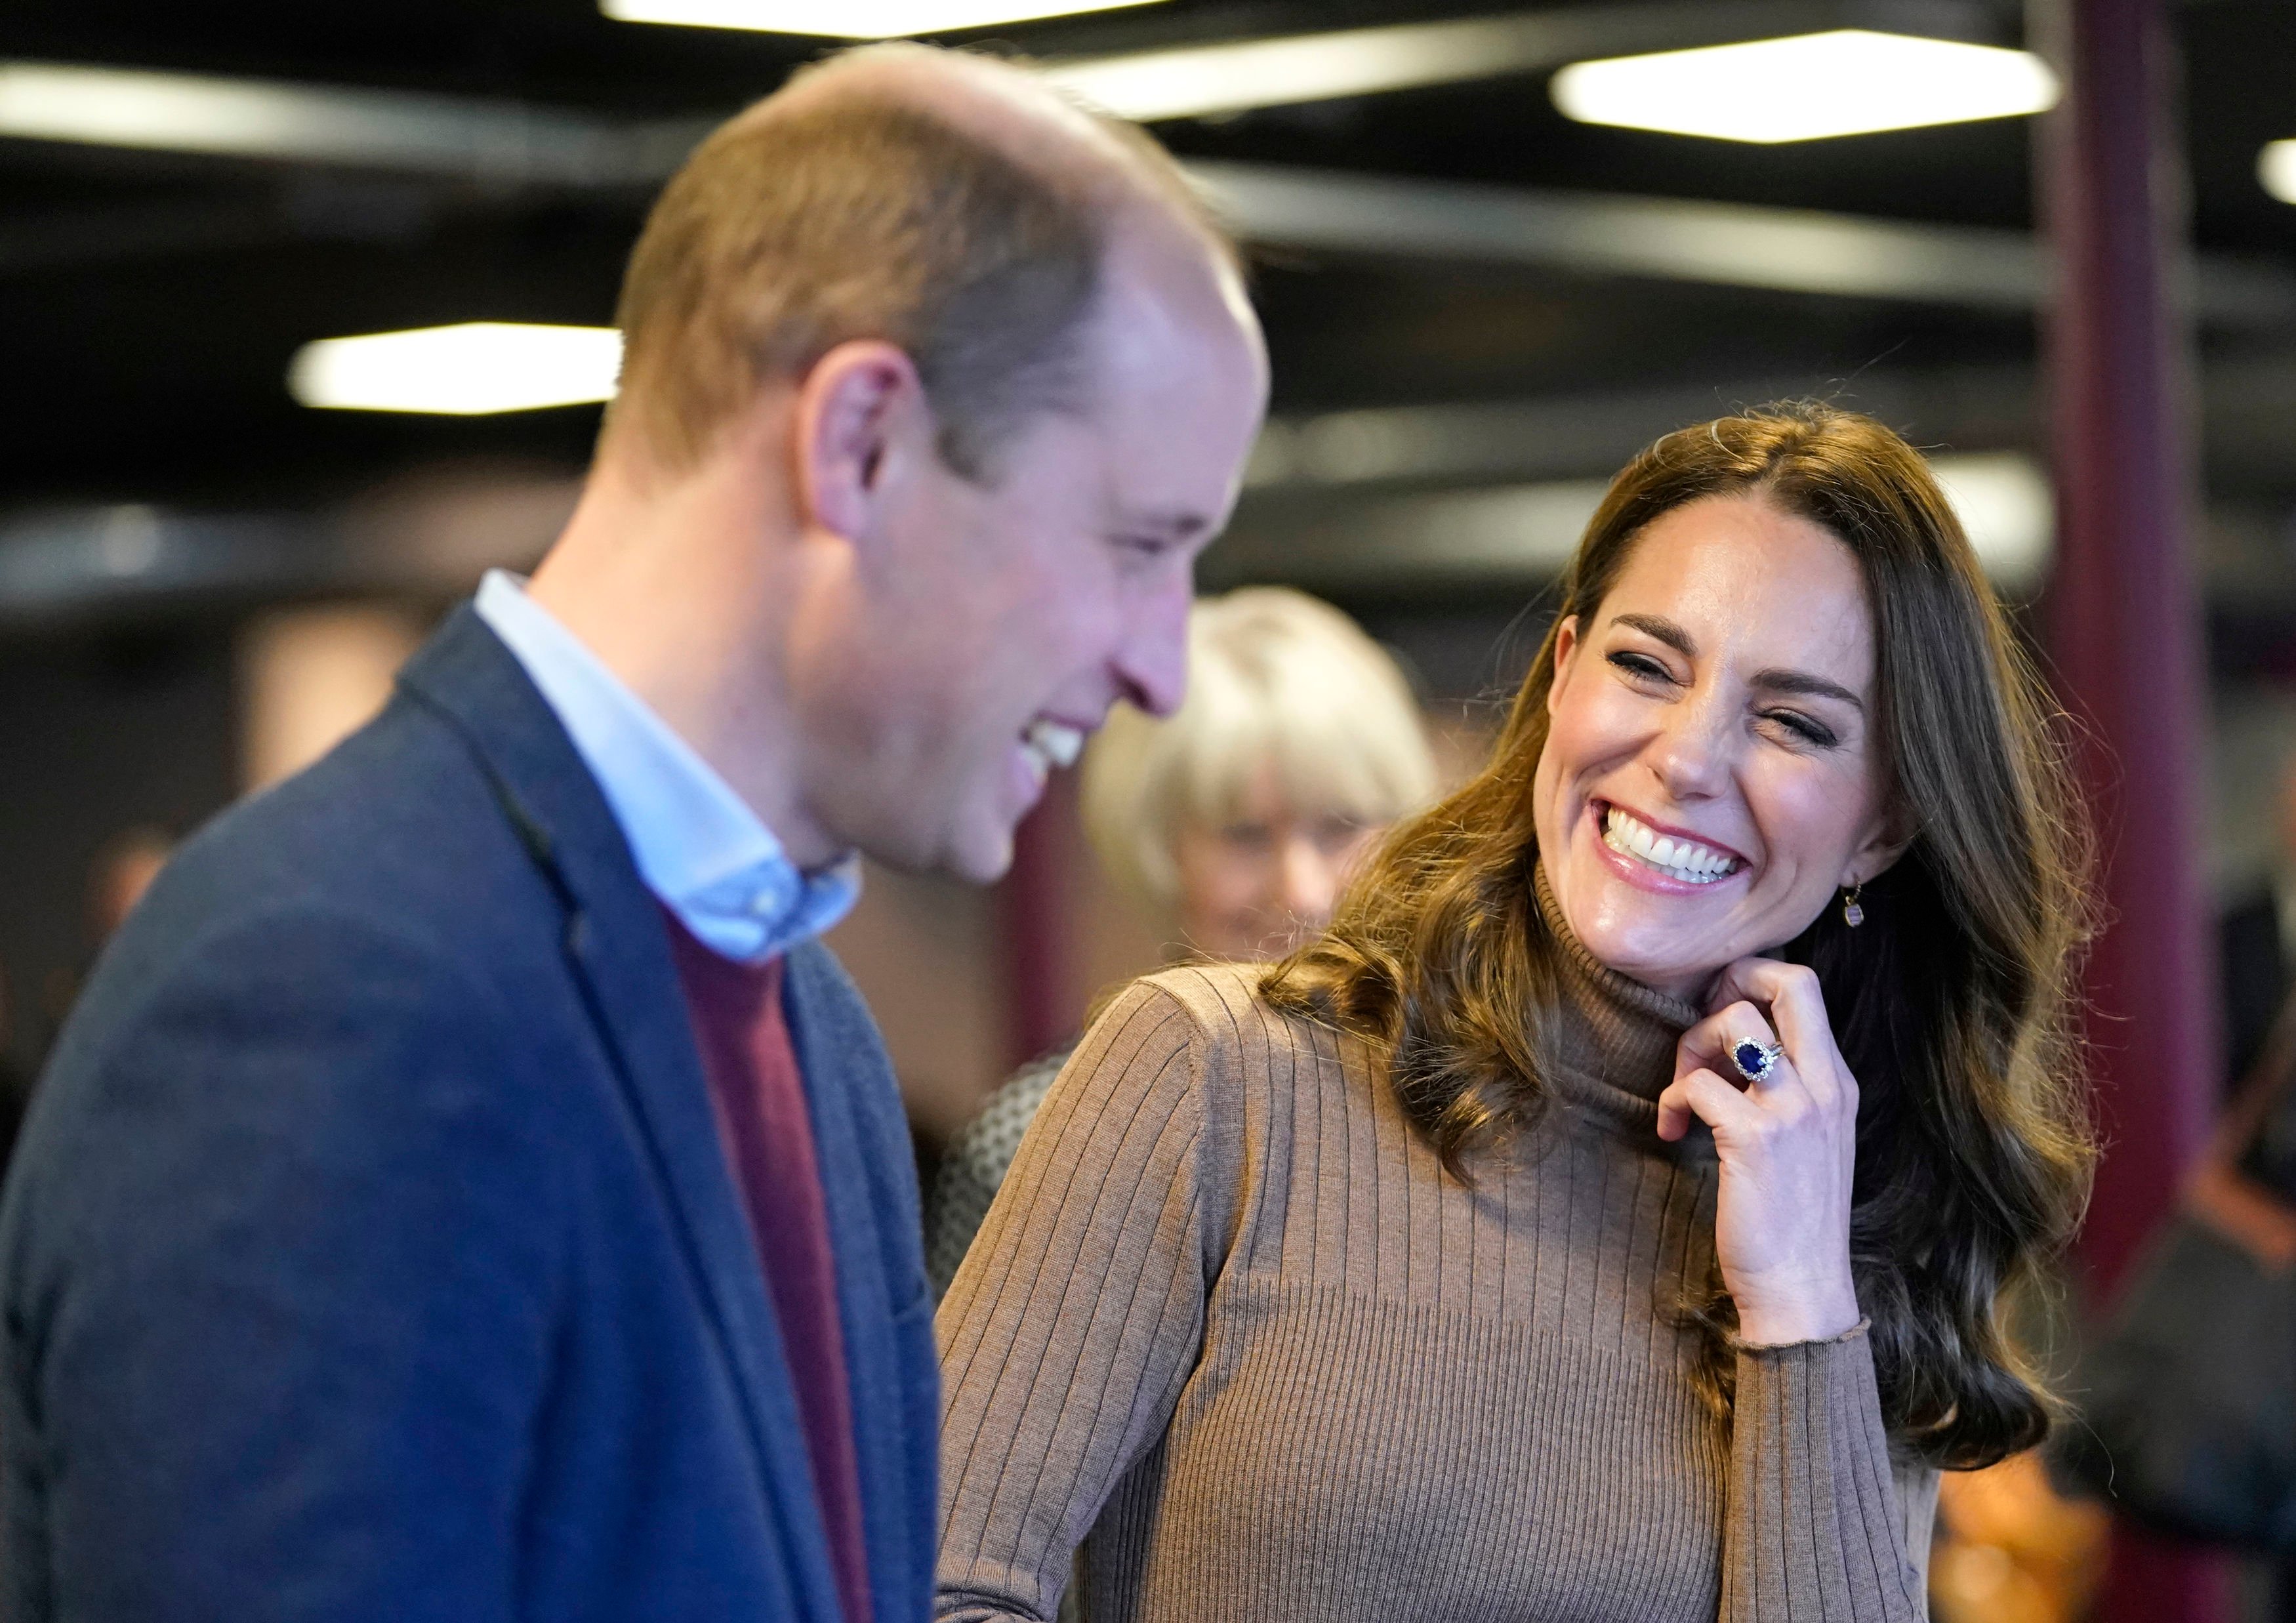 Prince William and Kate Middleton Delight Fans After Video Showing Them Dancing and Partying Goes Viral